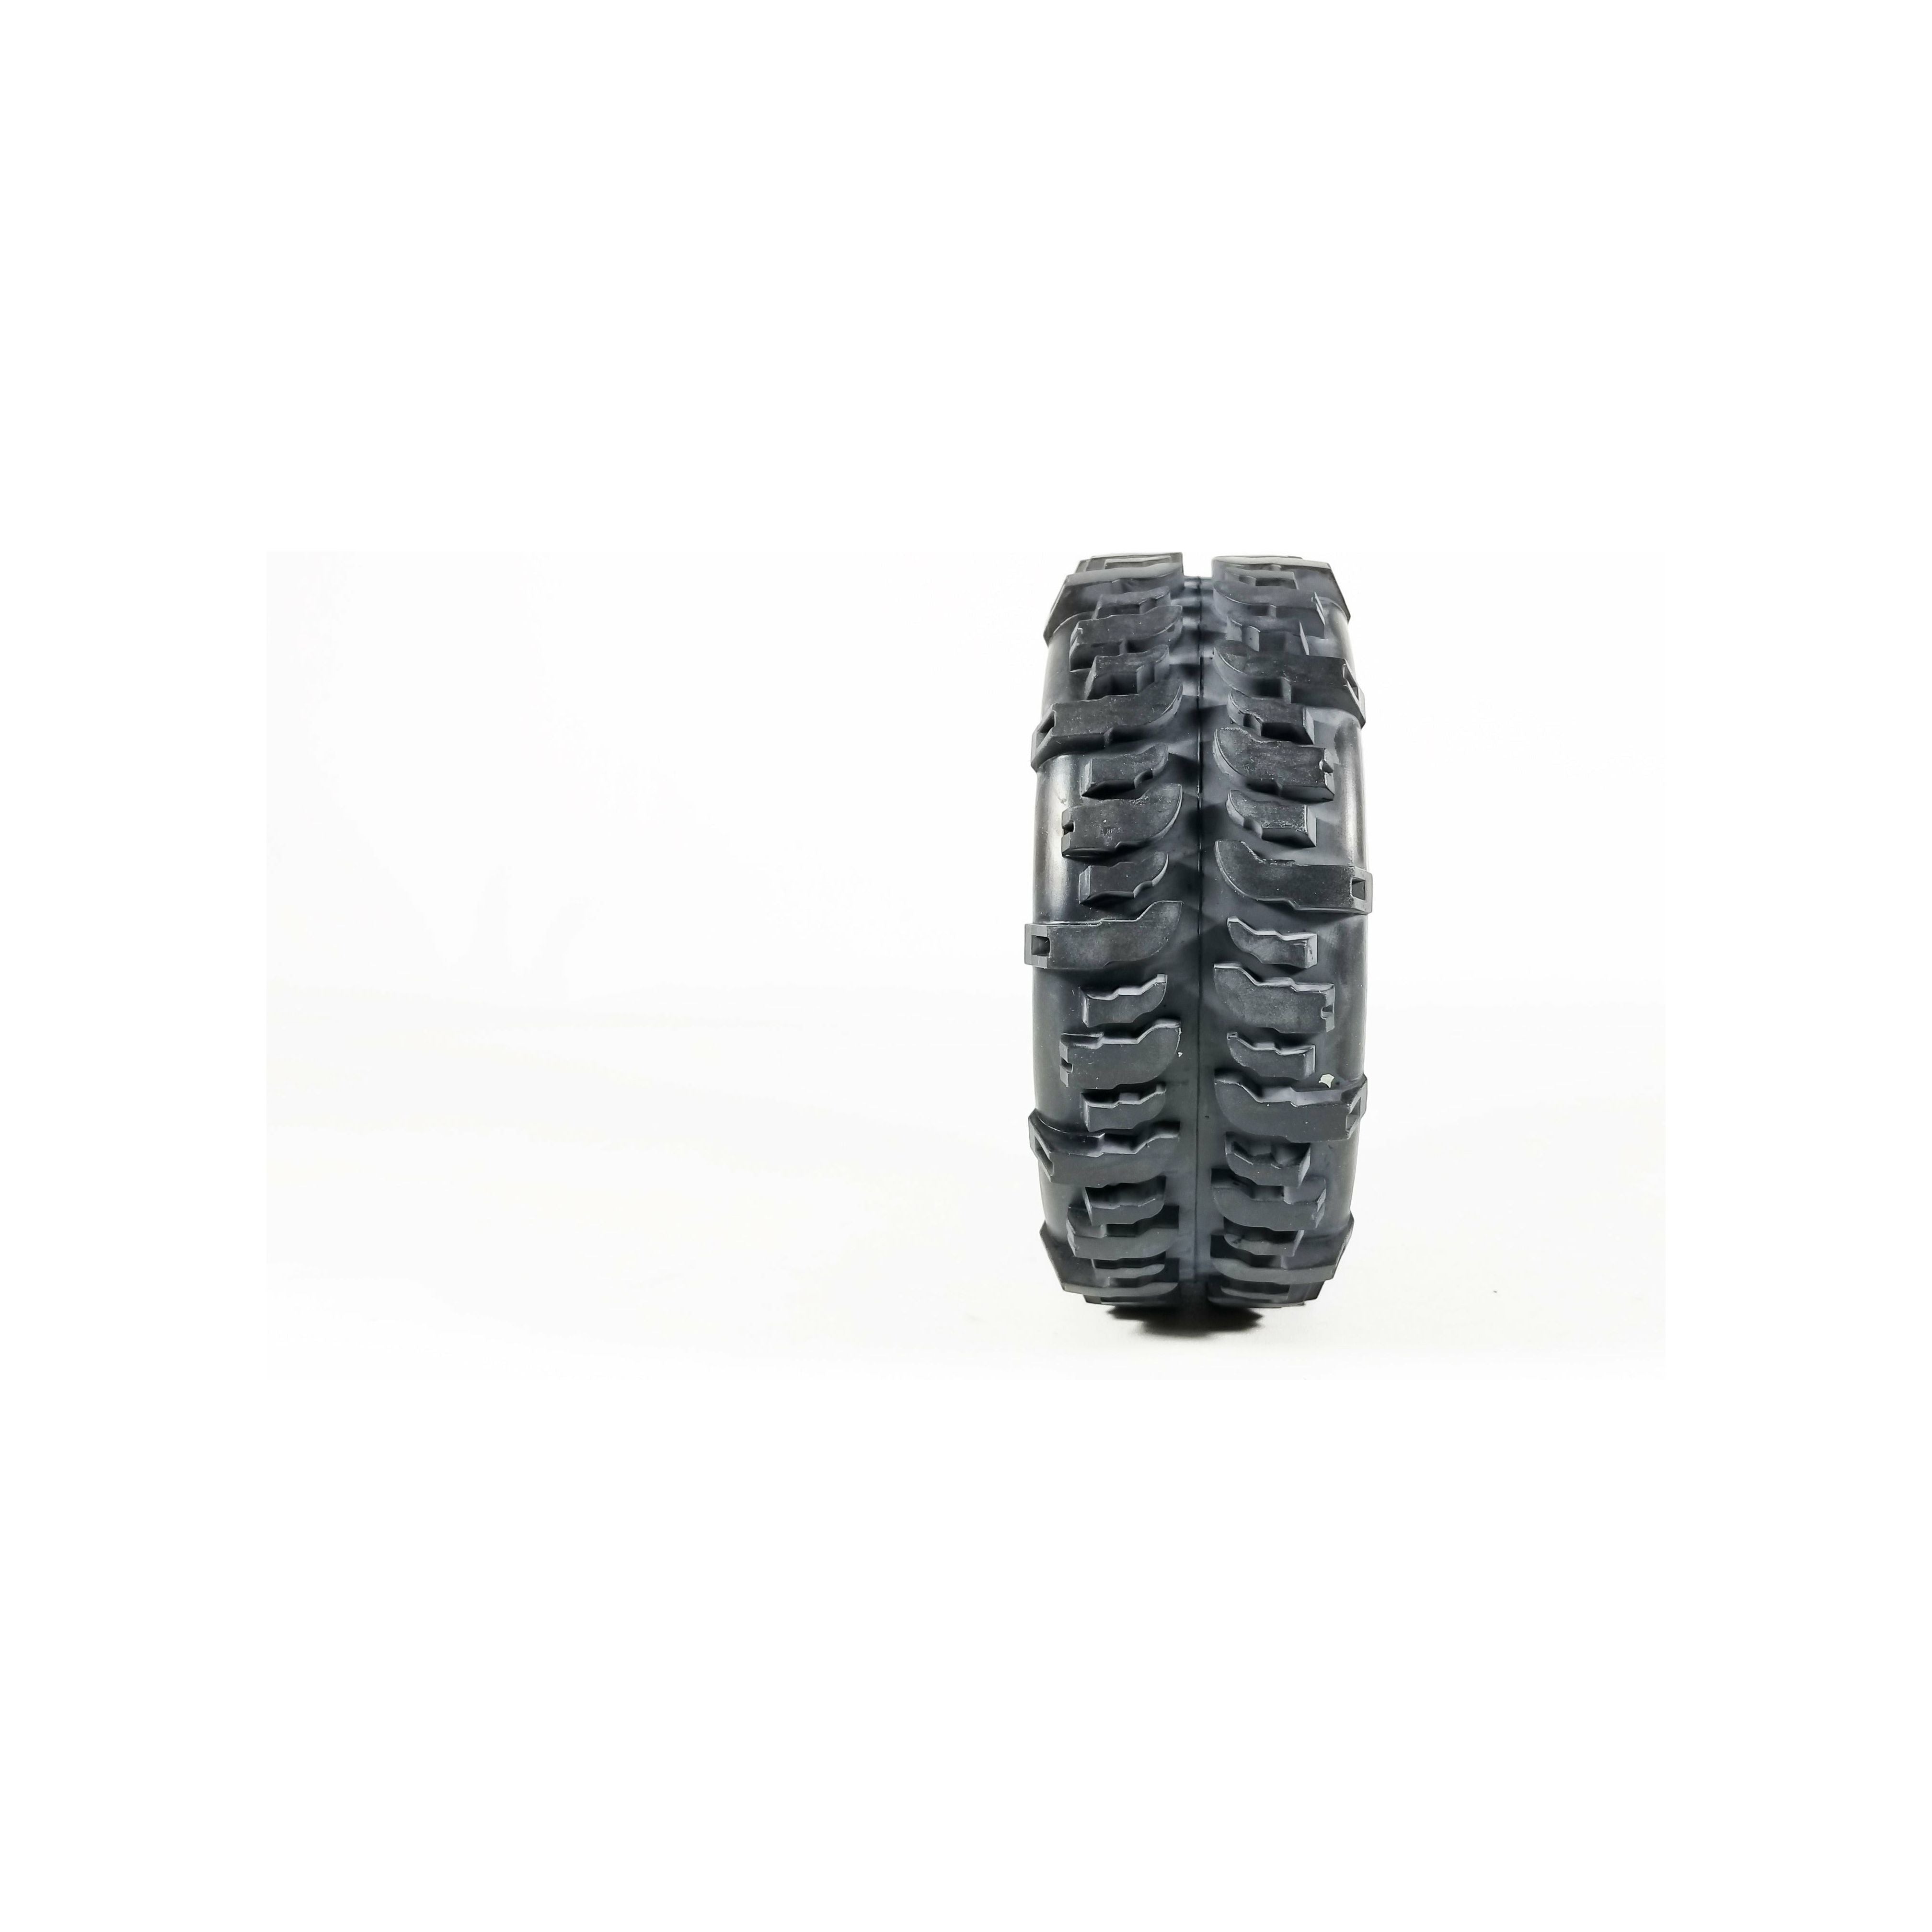 Swamp Dawg Monster Truck Tires (1 Pair) (Front or Rear)